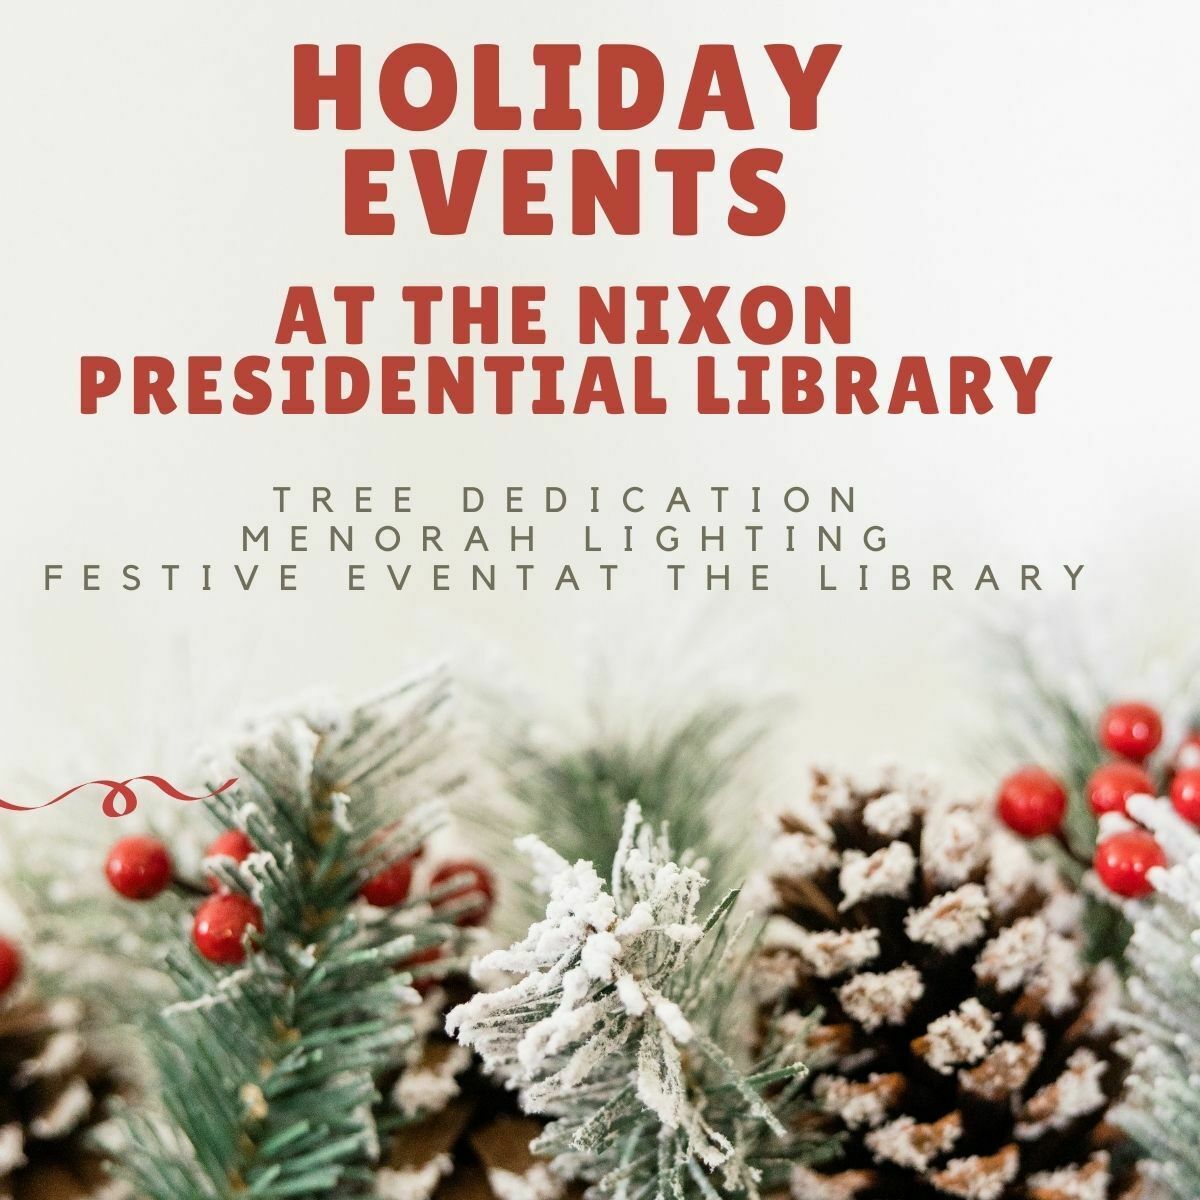 Holiday Events at Nixon Presidential Library Orange County, CA